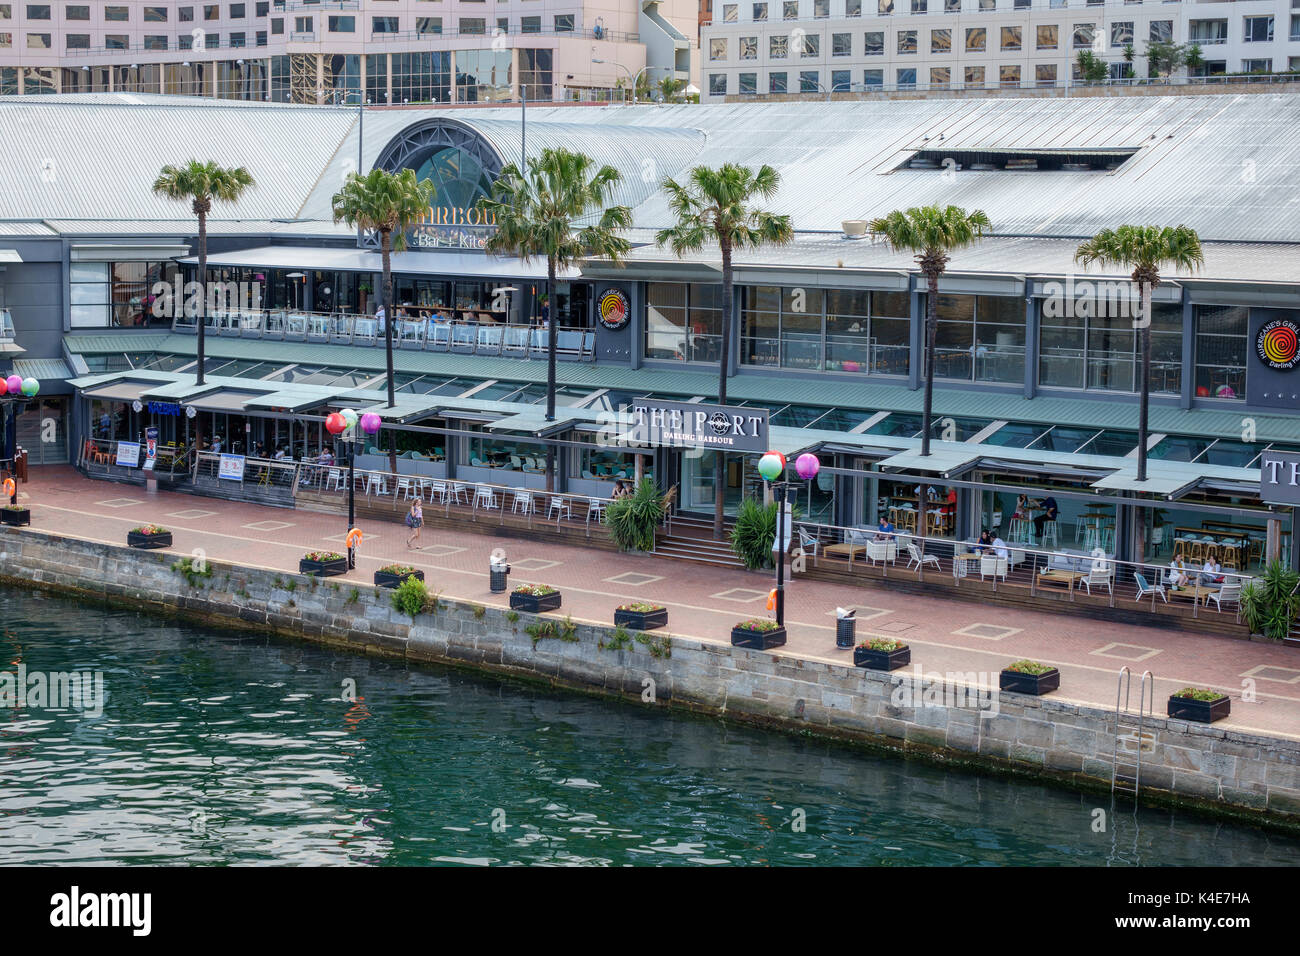 The Port At Darling Harbour Bars And Restaurants  And The Harbourside Shopping Centre By The Water Front Sydney Australia Stock Photo